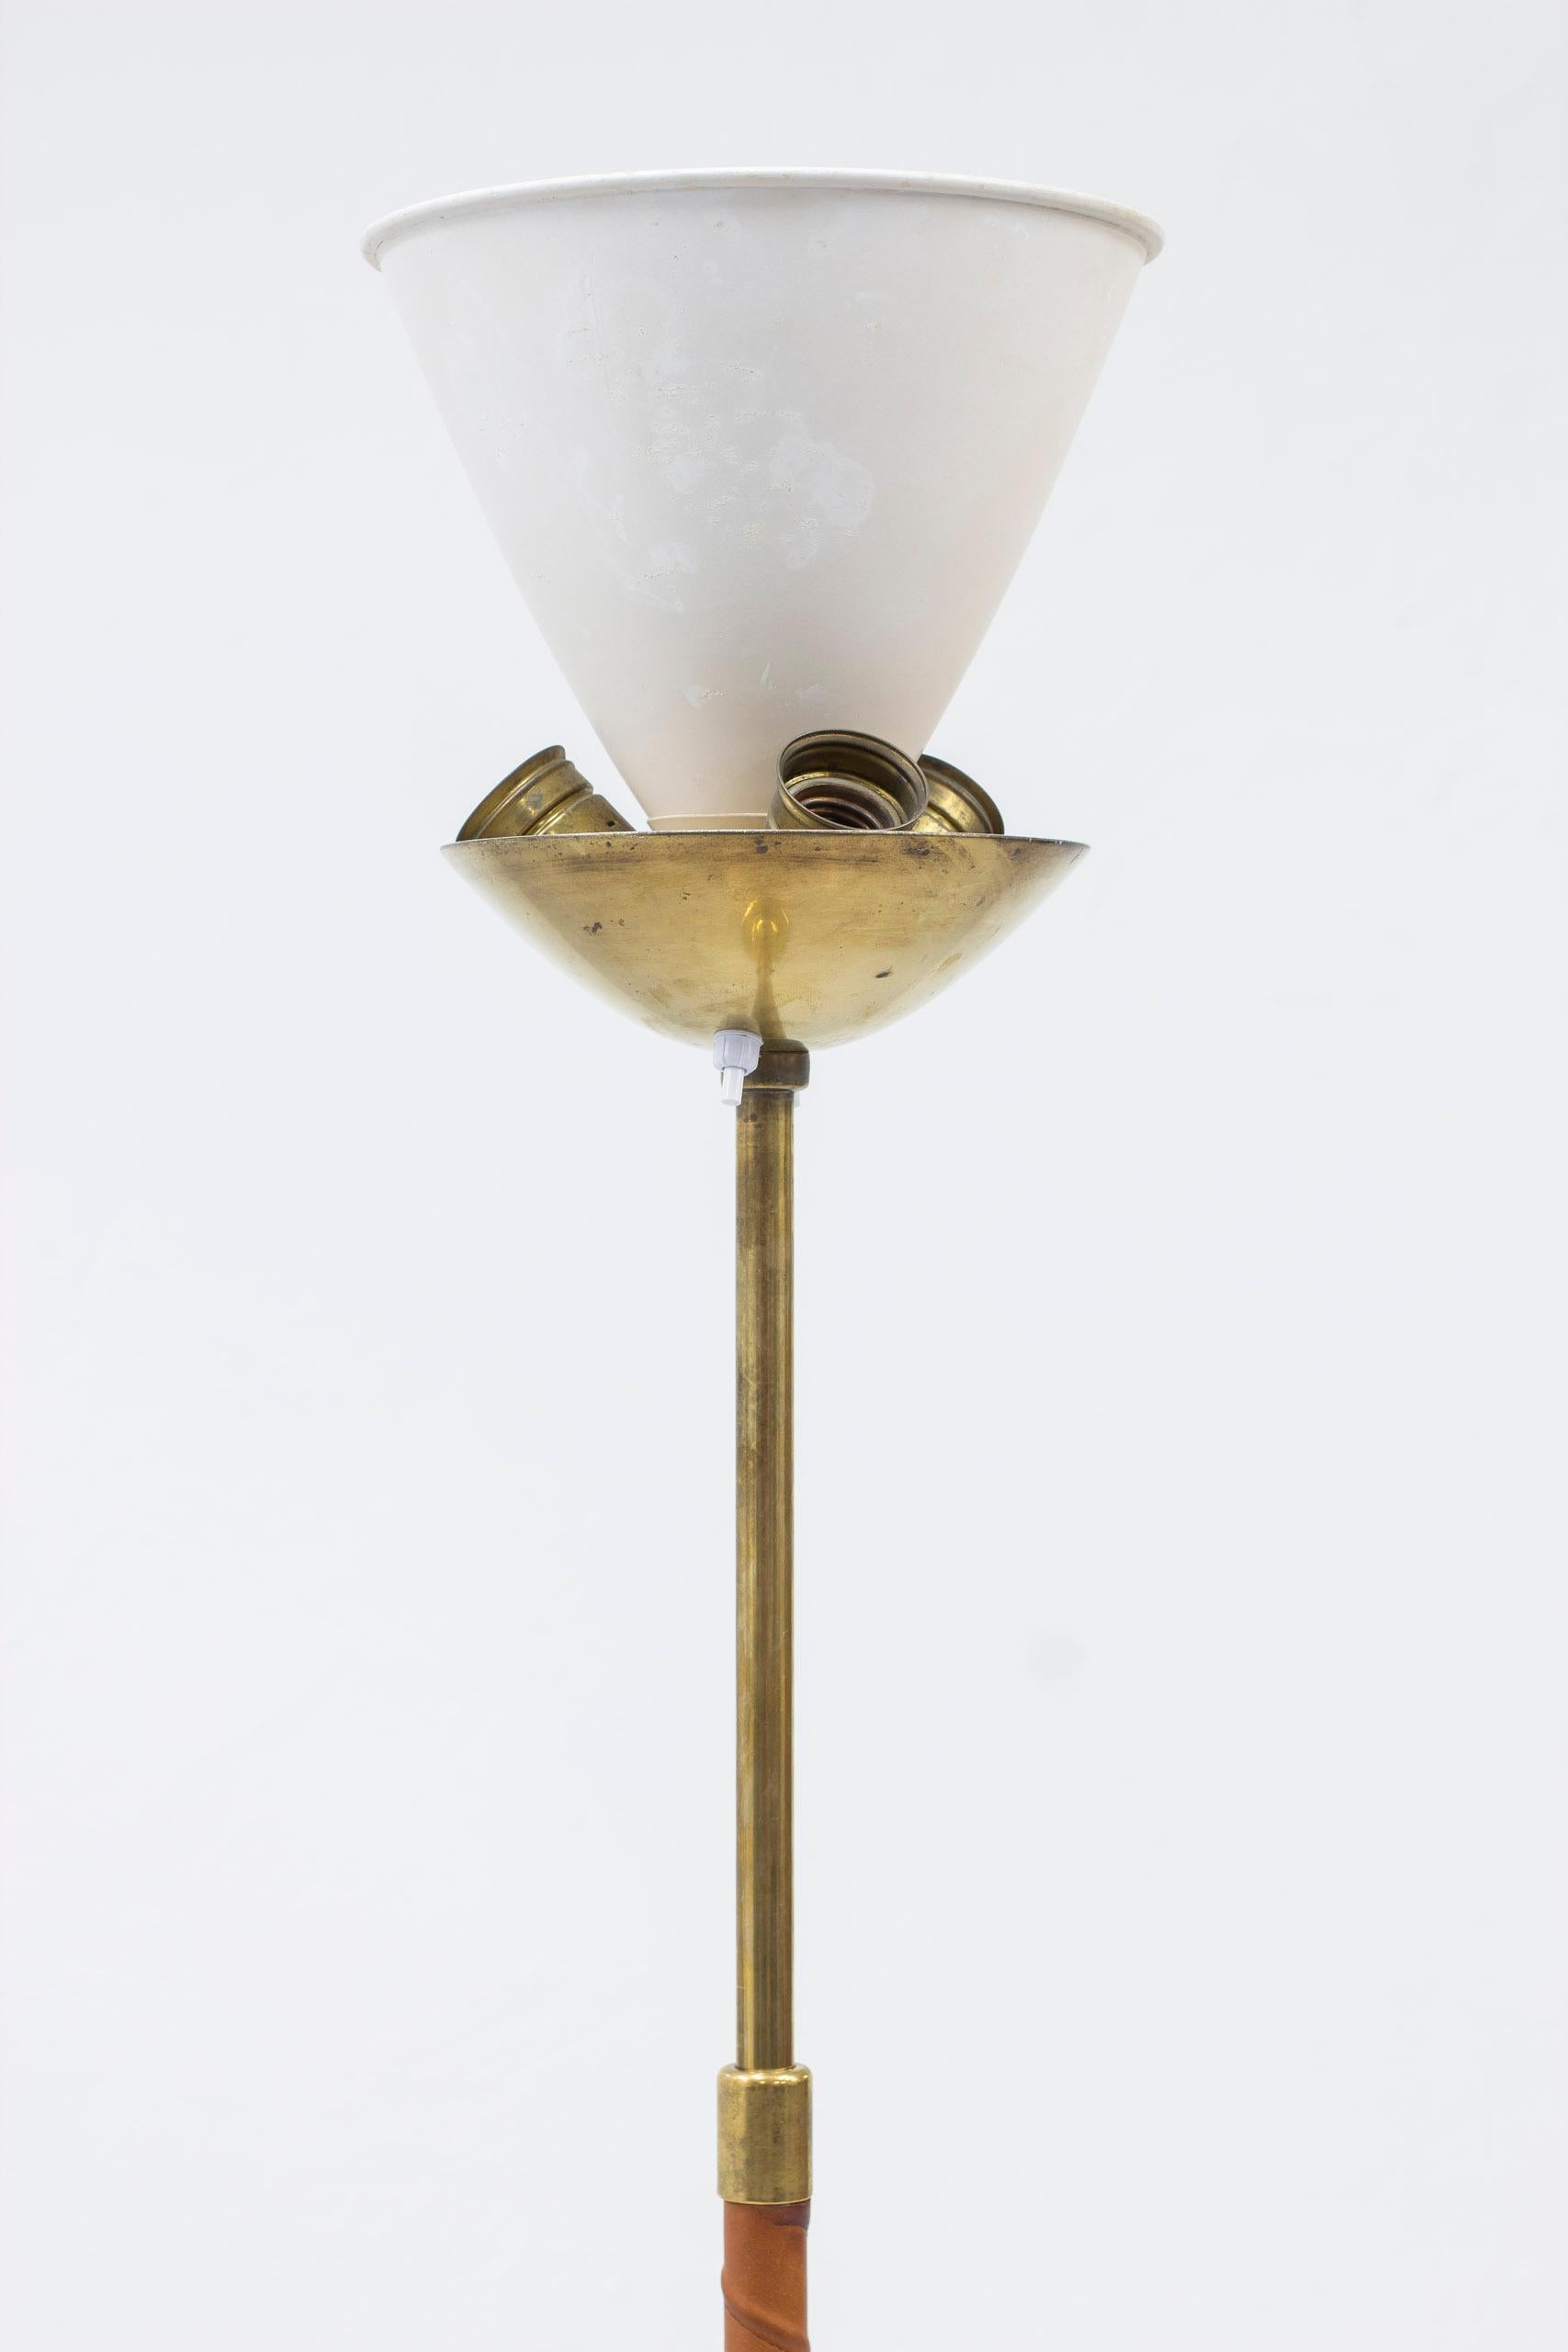 Leather and Brass Floor Lamp by Bertil Brisborg for NK, Sweden, 1940s For Sale 4